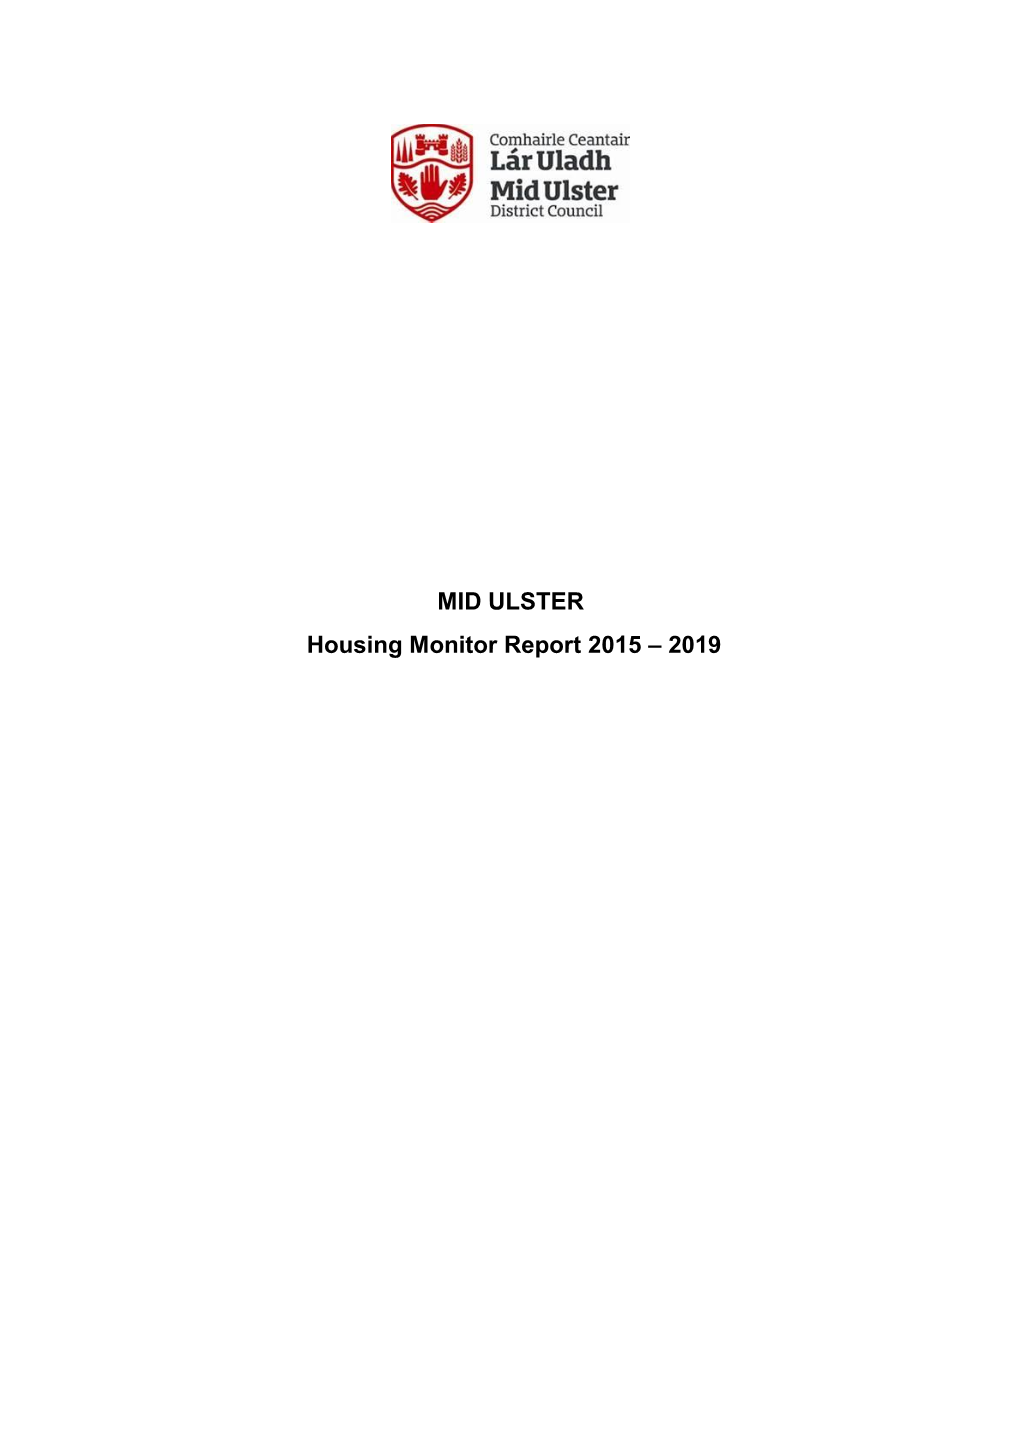 MID ULSTER Housing Monitor Report 2015 – 2019